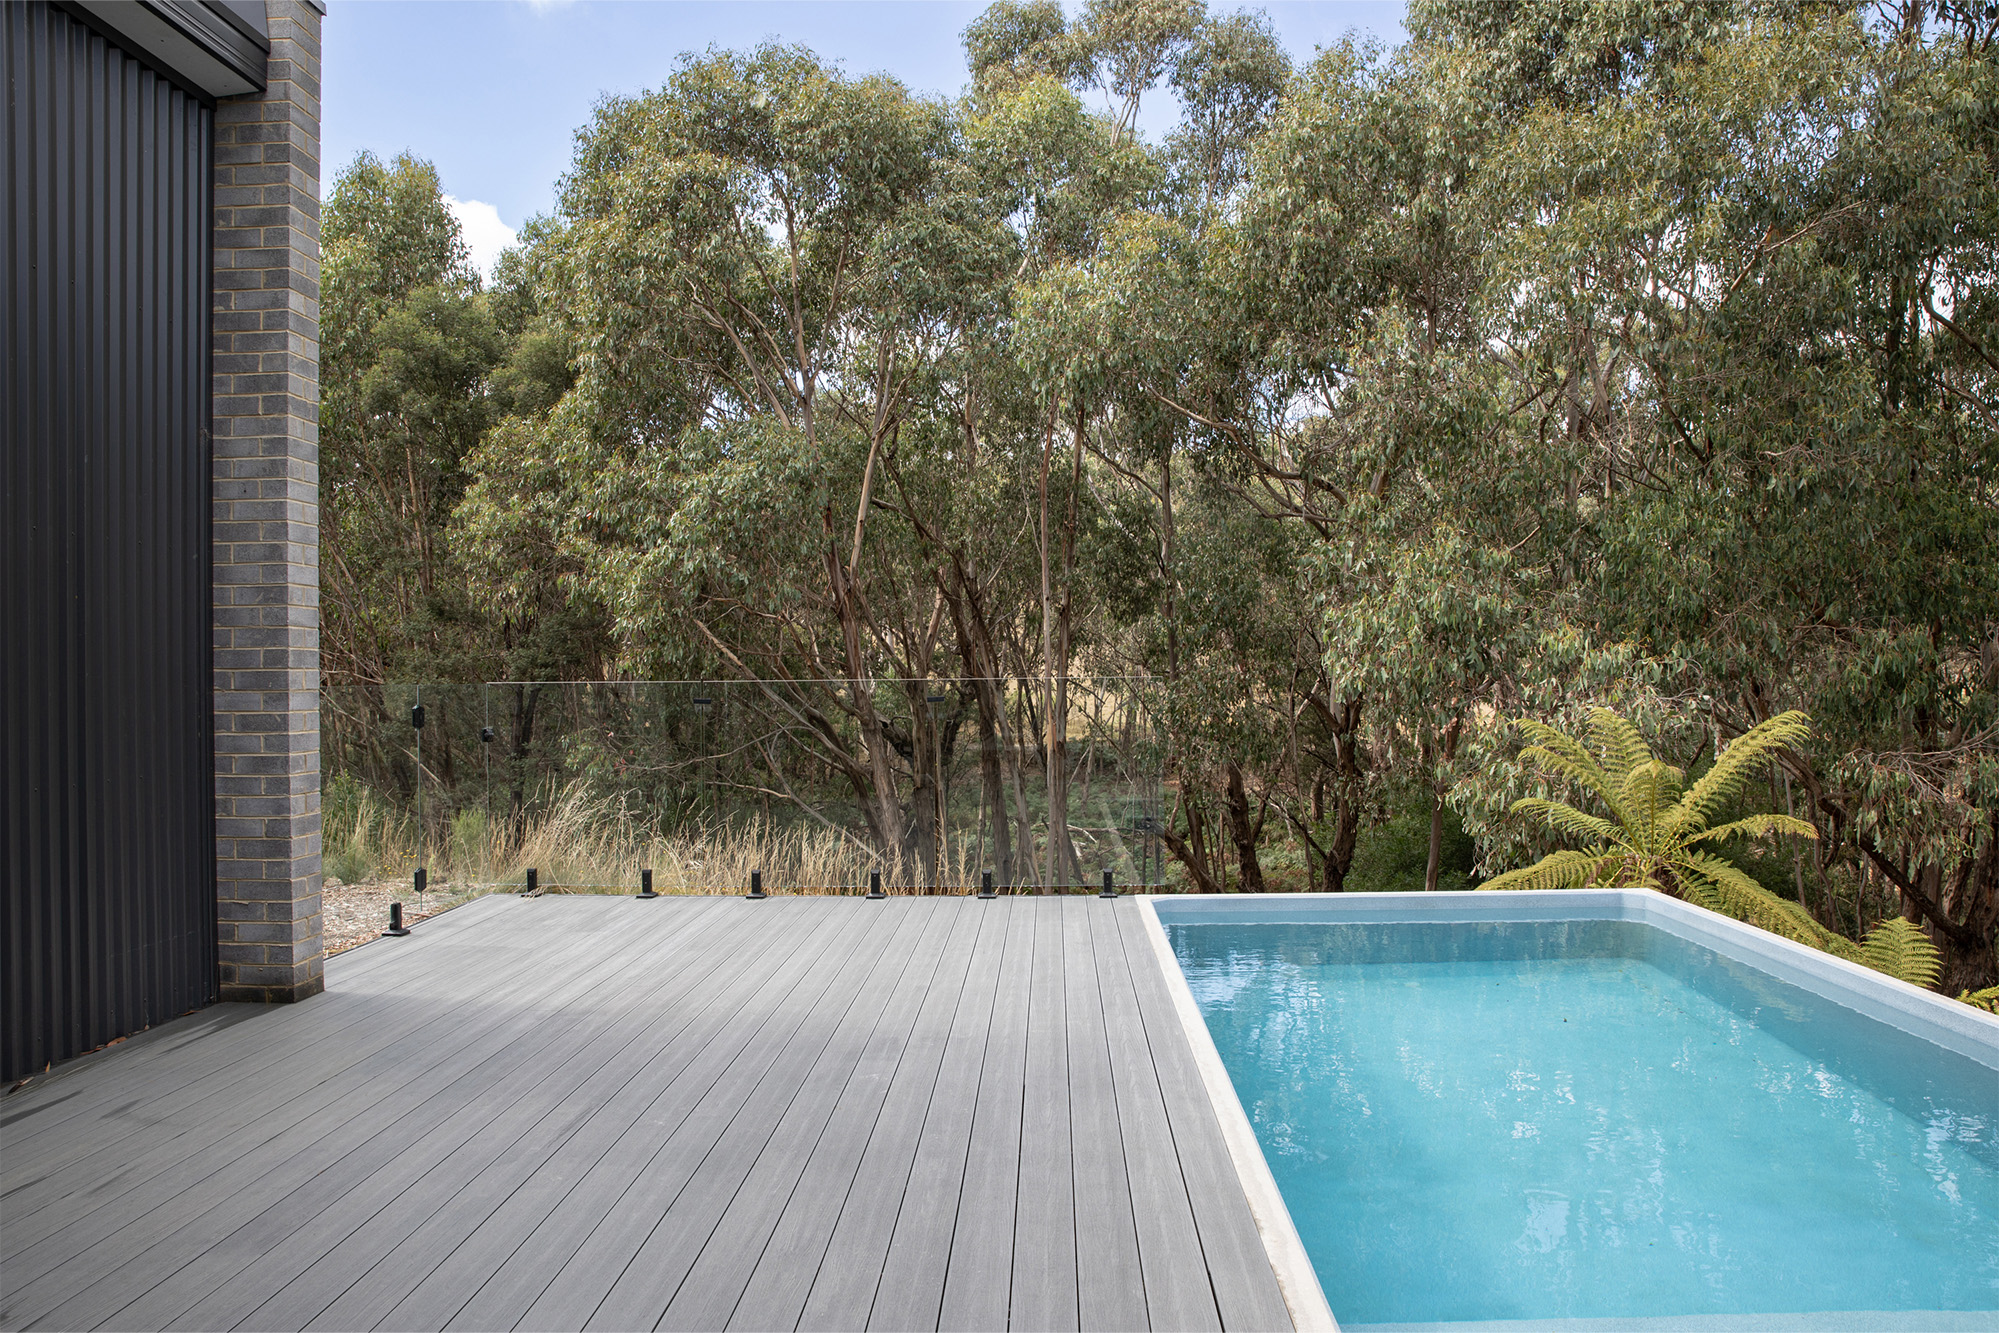 A swimming pool with composite decking and trees.